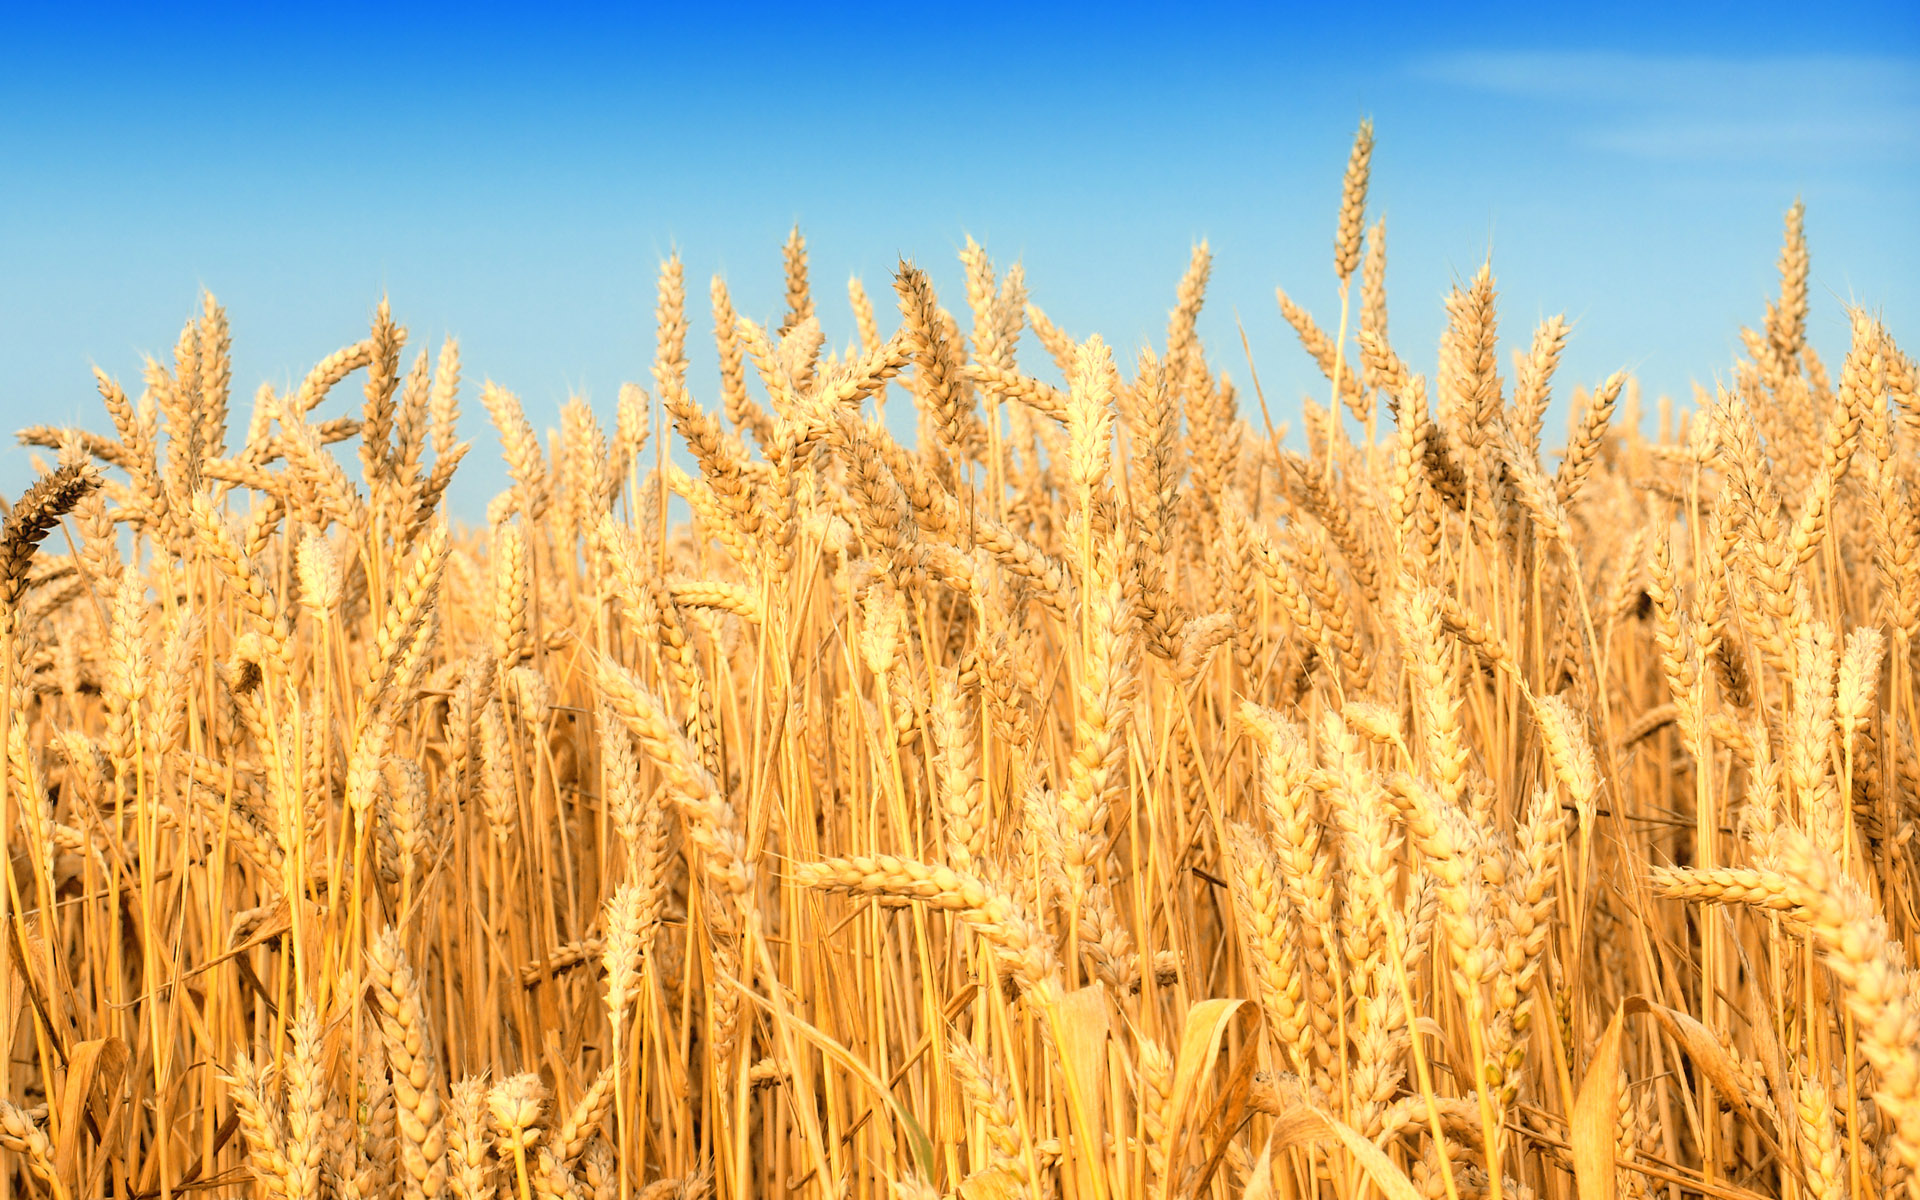 Iranian Gov't Steps Up Fund Raising for Buying Wheat